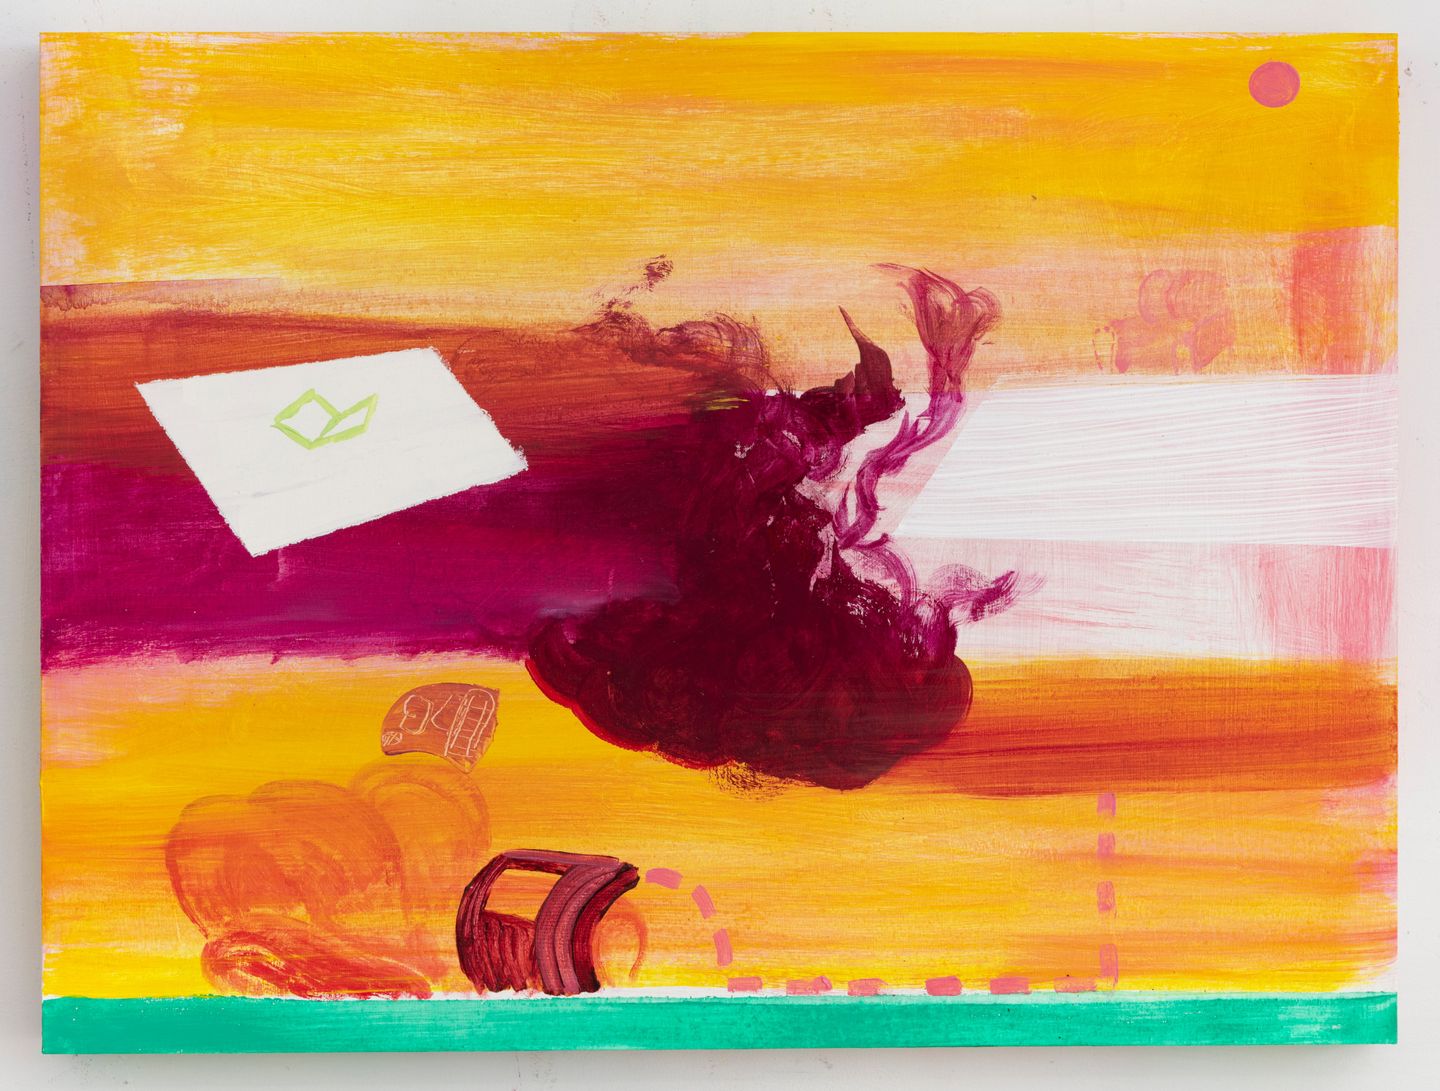 Walter Price, Is there son in the room? (2020). Acrylic, photo collage, super white on wood. 45.9 x 61.1 x 5.1 cm. Courtesy the artist, The Modern Institute/Toby Webster Ltd., Glasgow and Greene Naftali, New York.